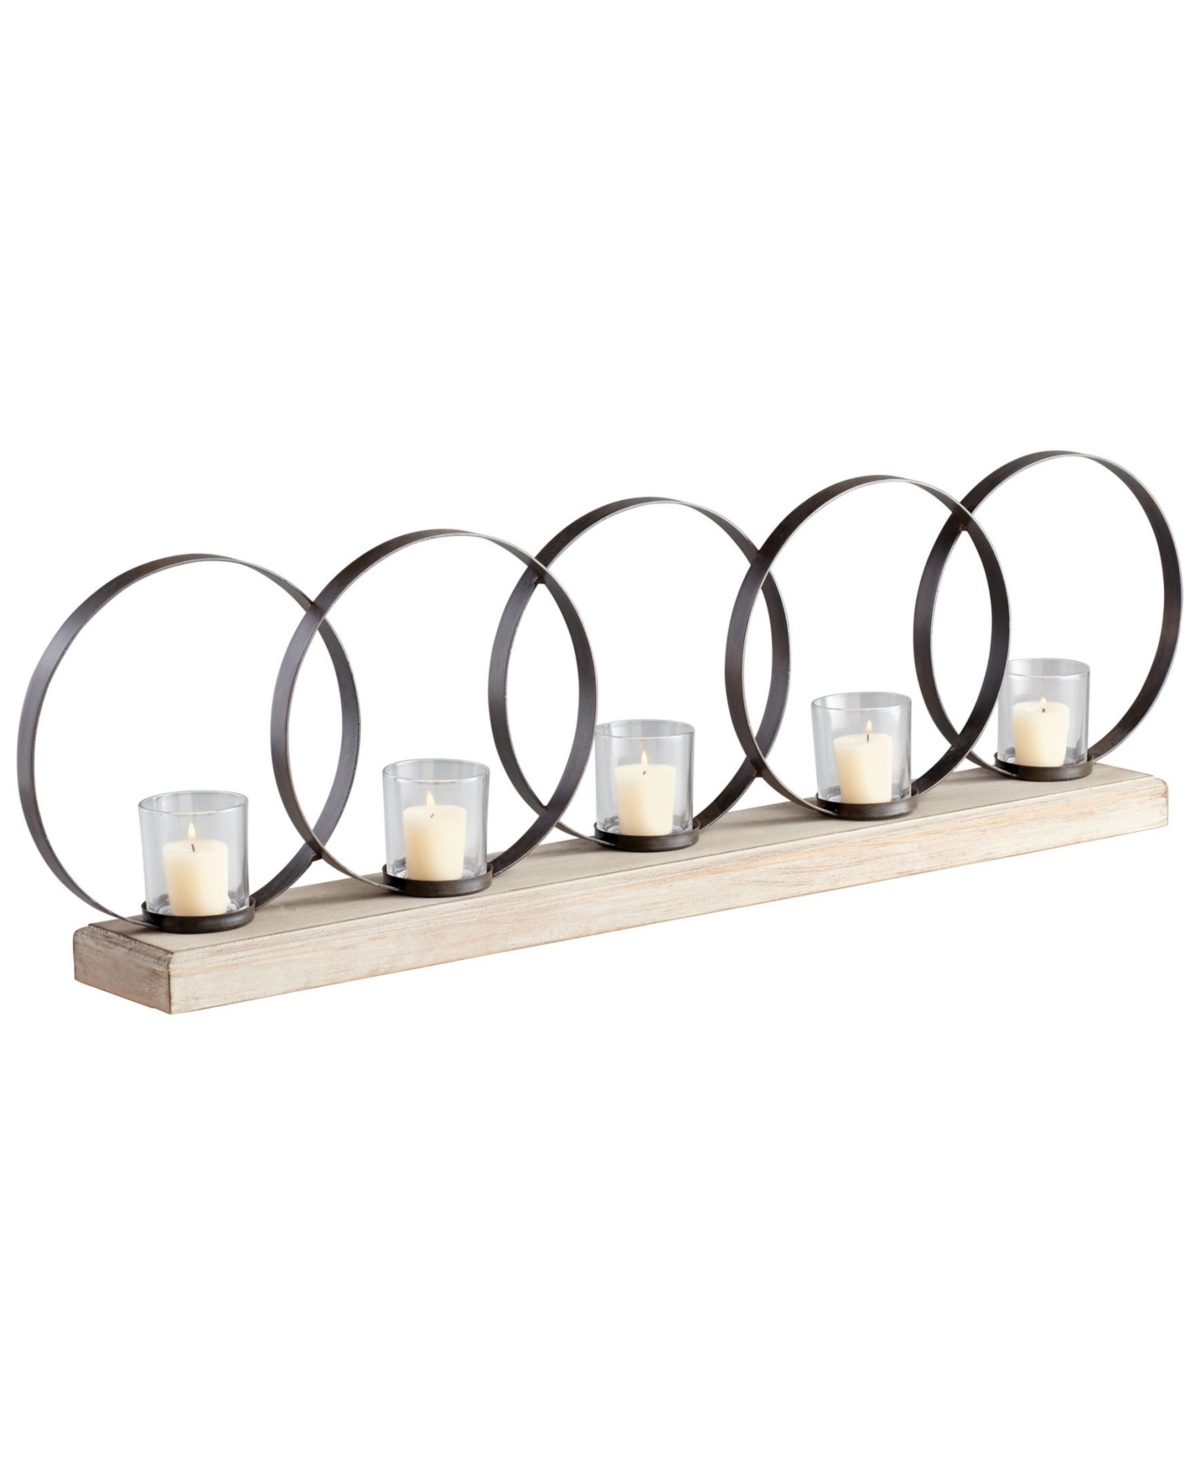 Cyan Design Ohhh 5-Candle Candleholder